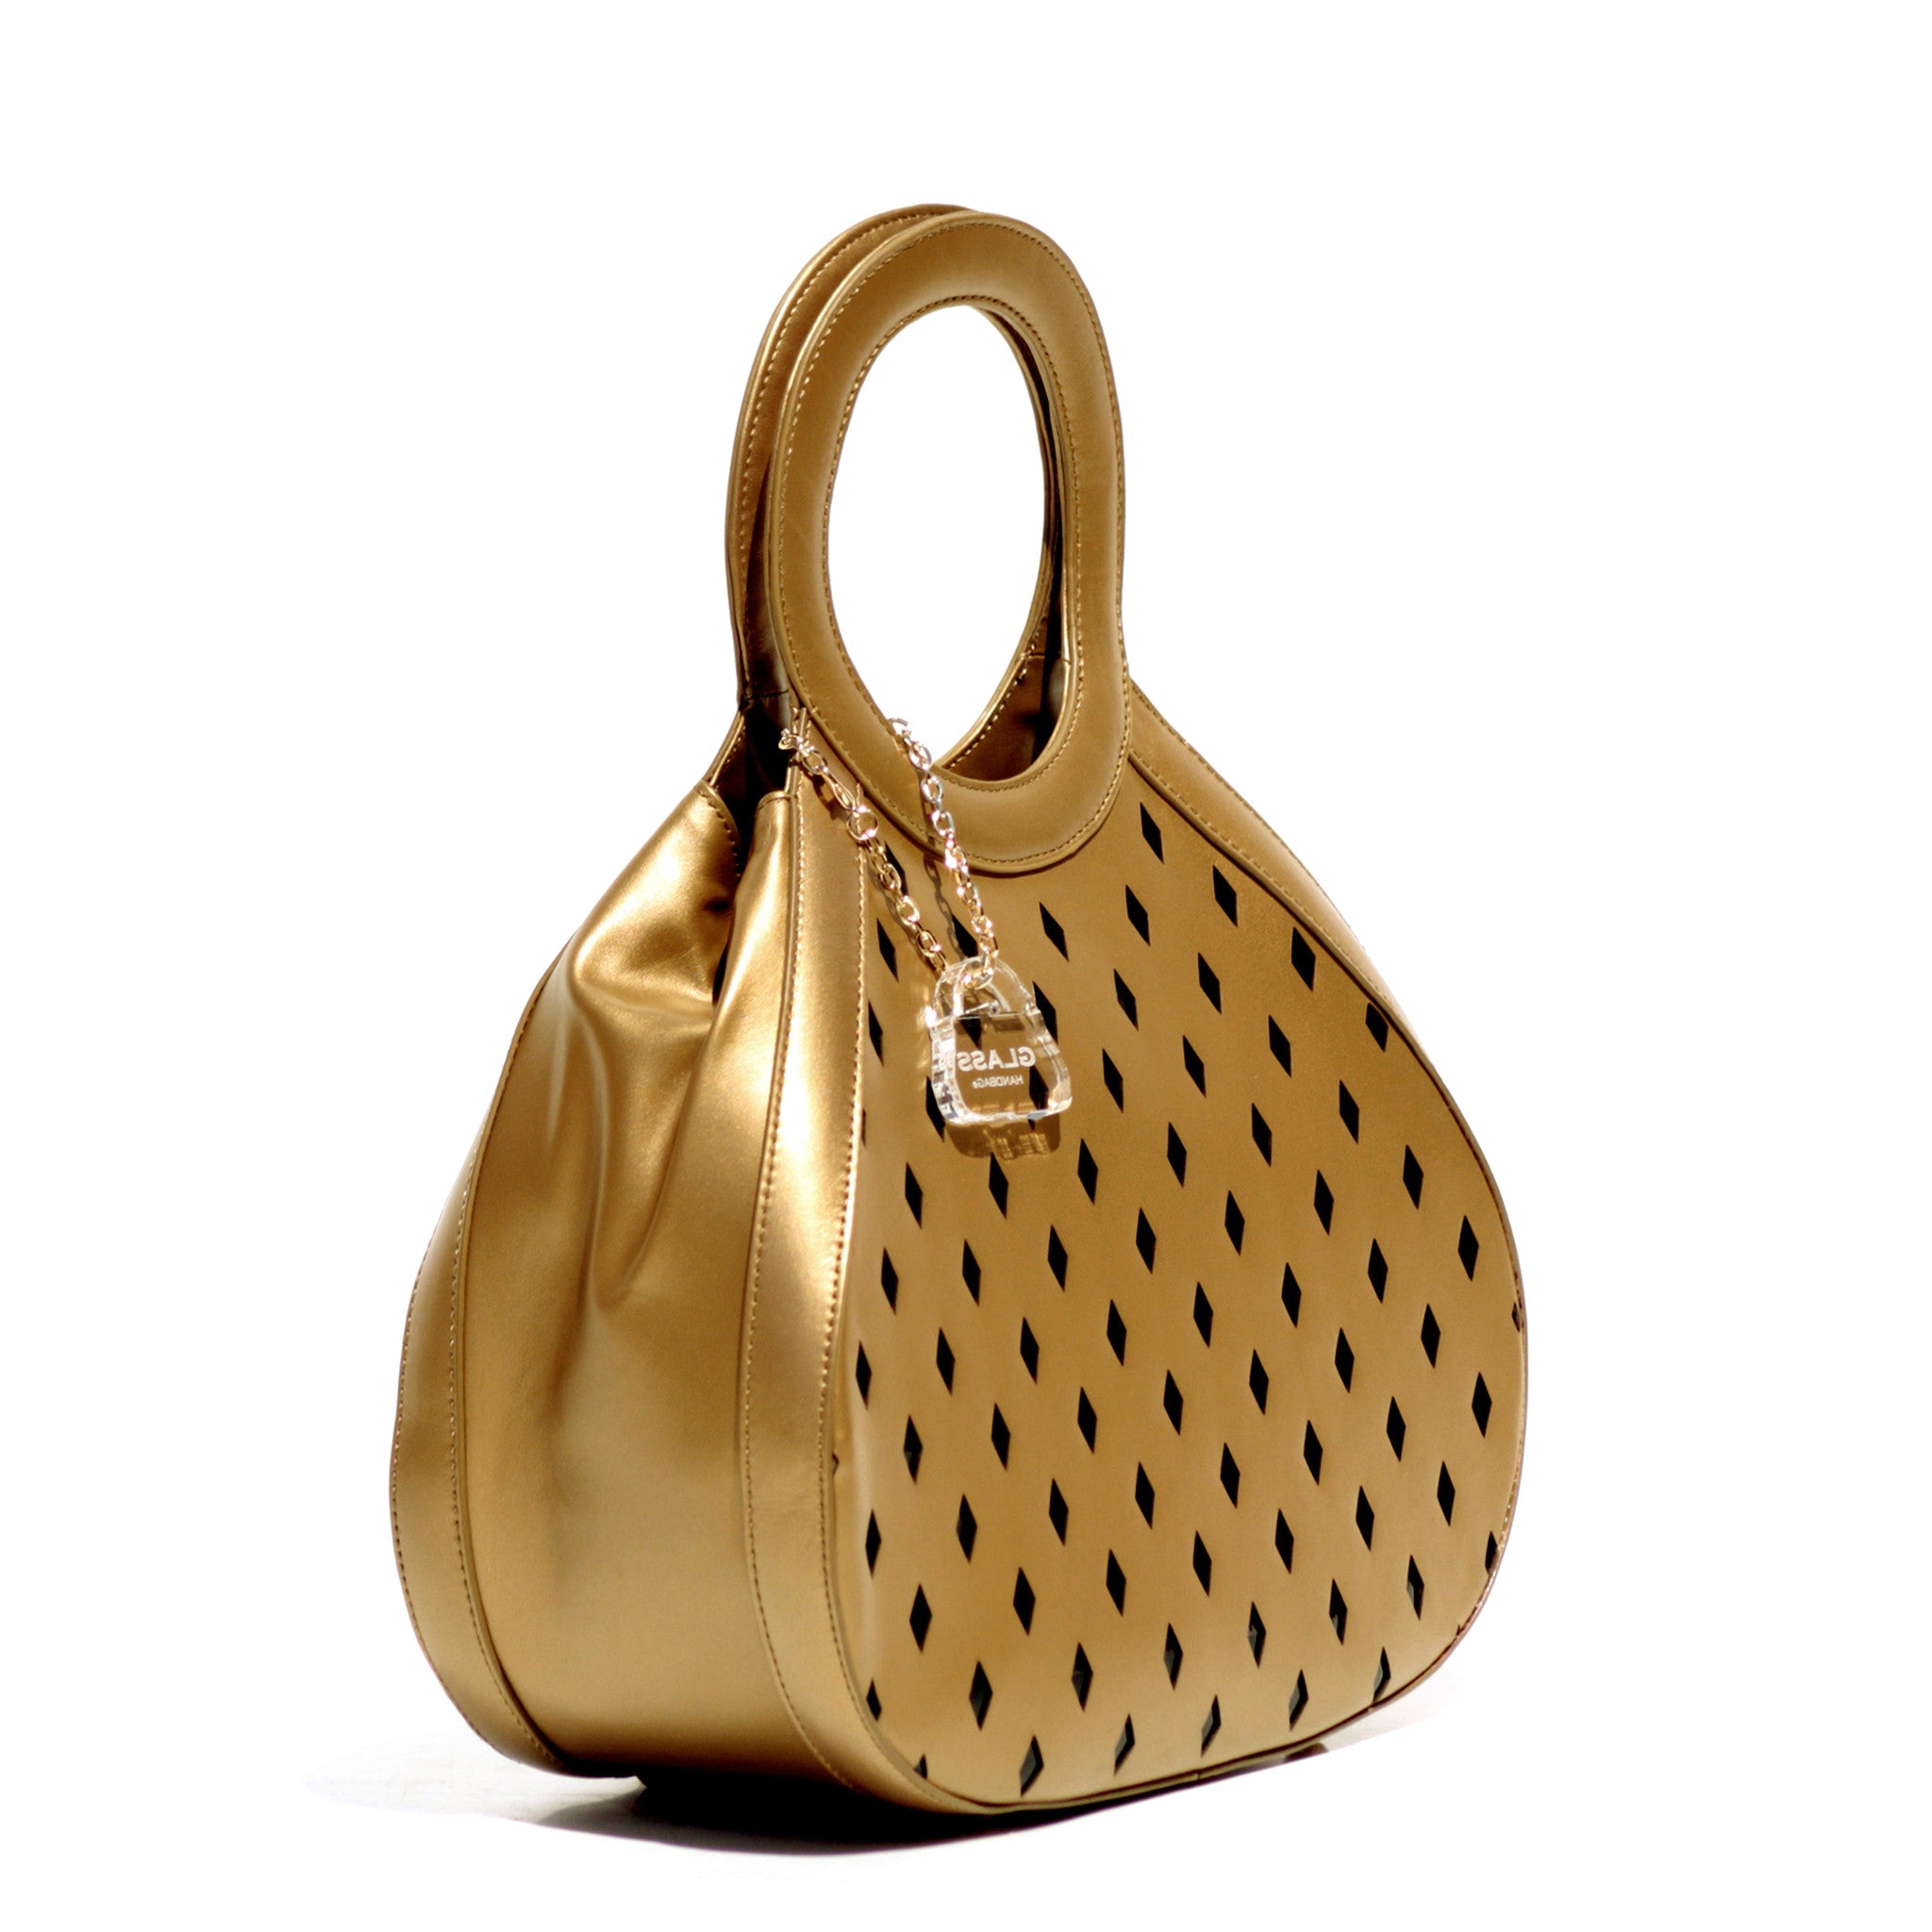 Glass Handbag Teardrop Satchel in Gold napa leather plus gift with purchase with Rave evening clutch in silver